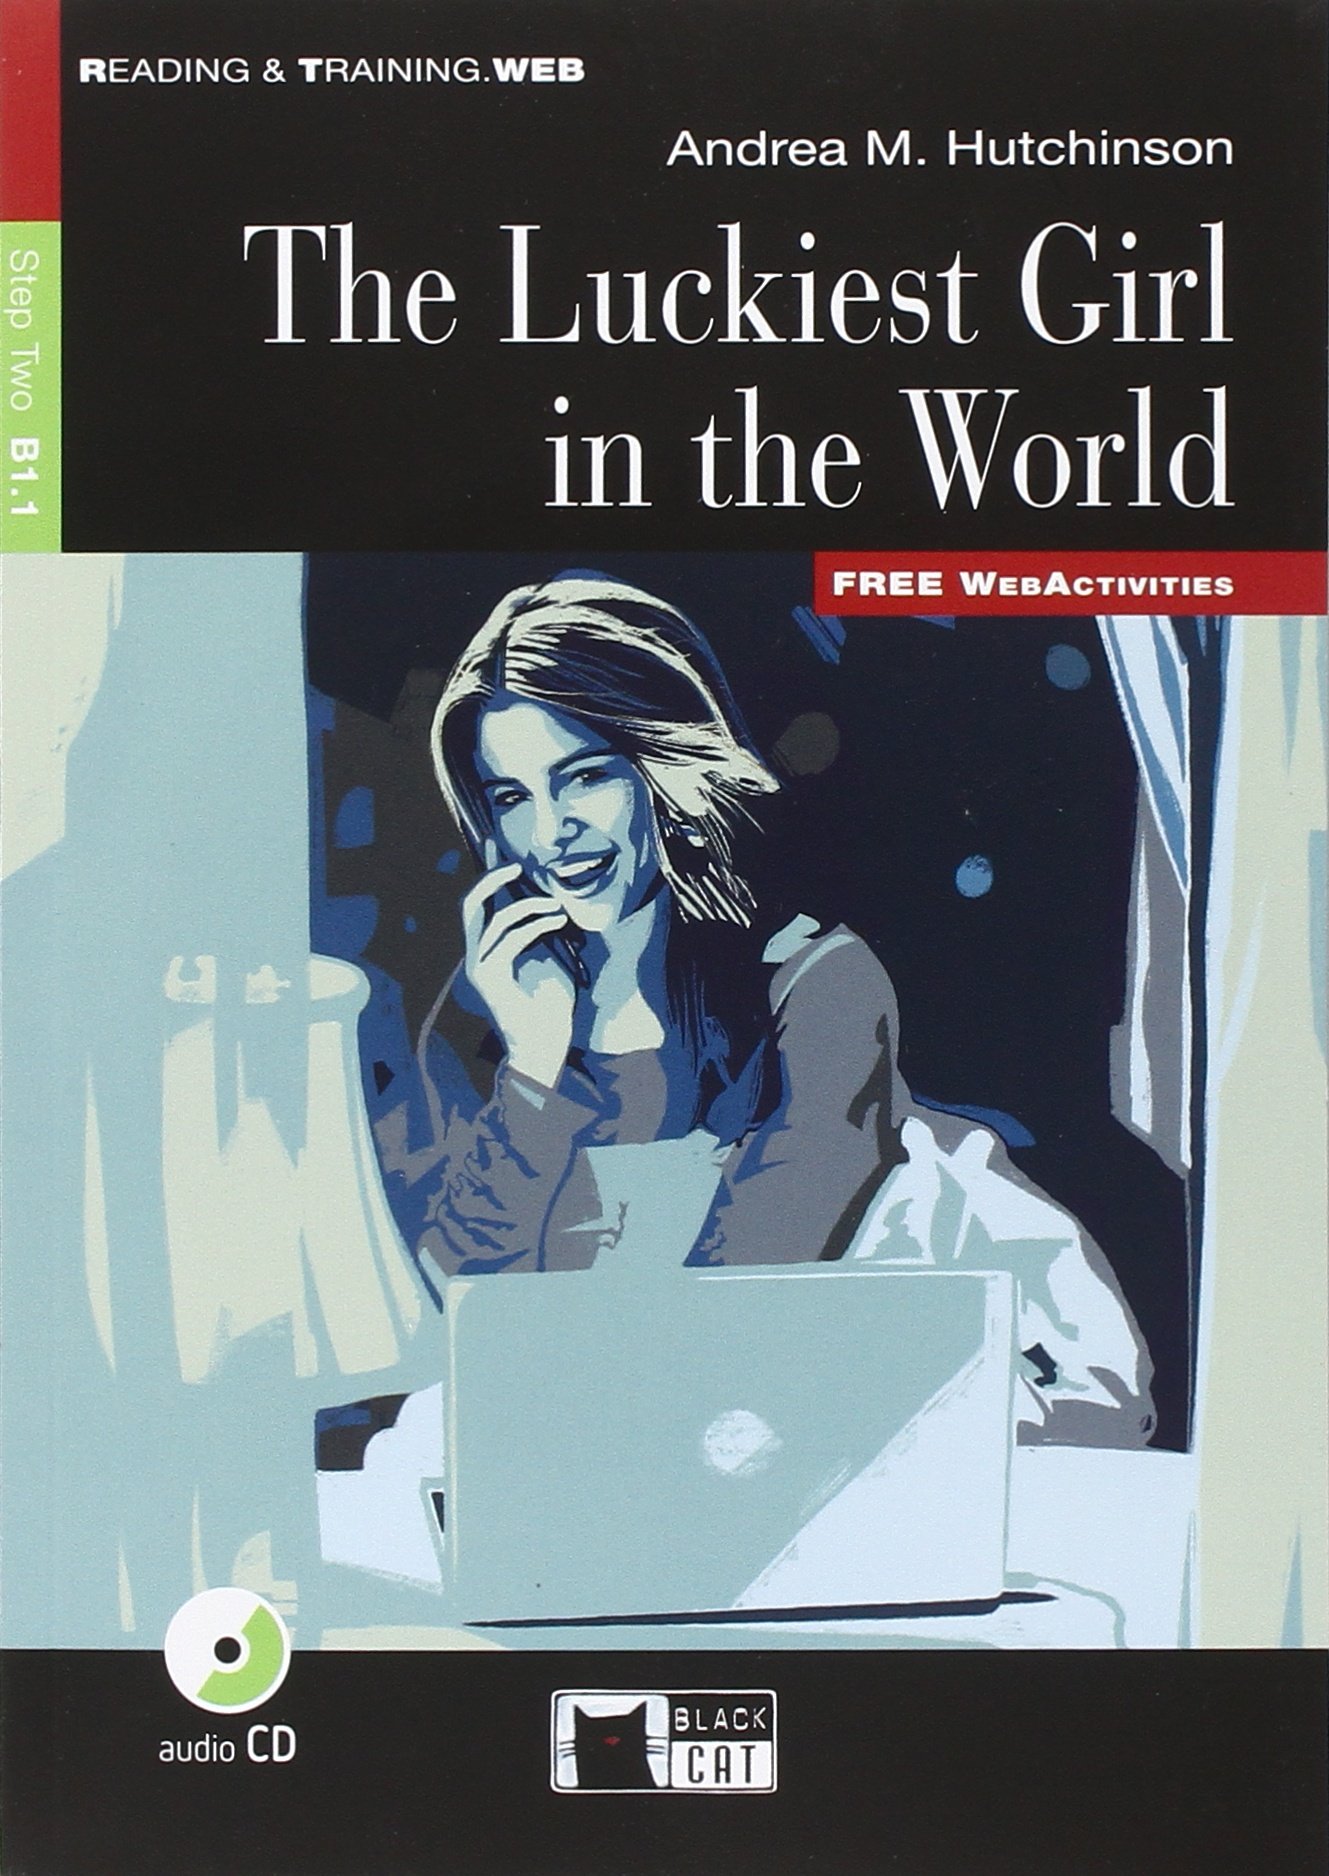 The Luckiest Girl in the World + Audio CD + App